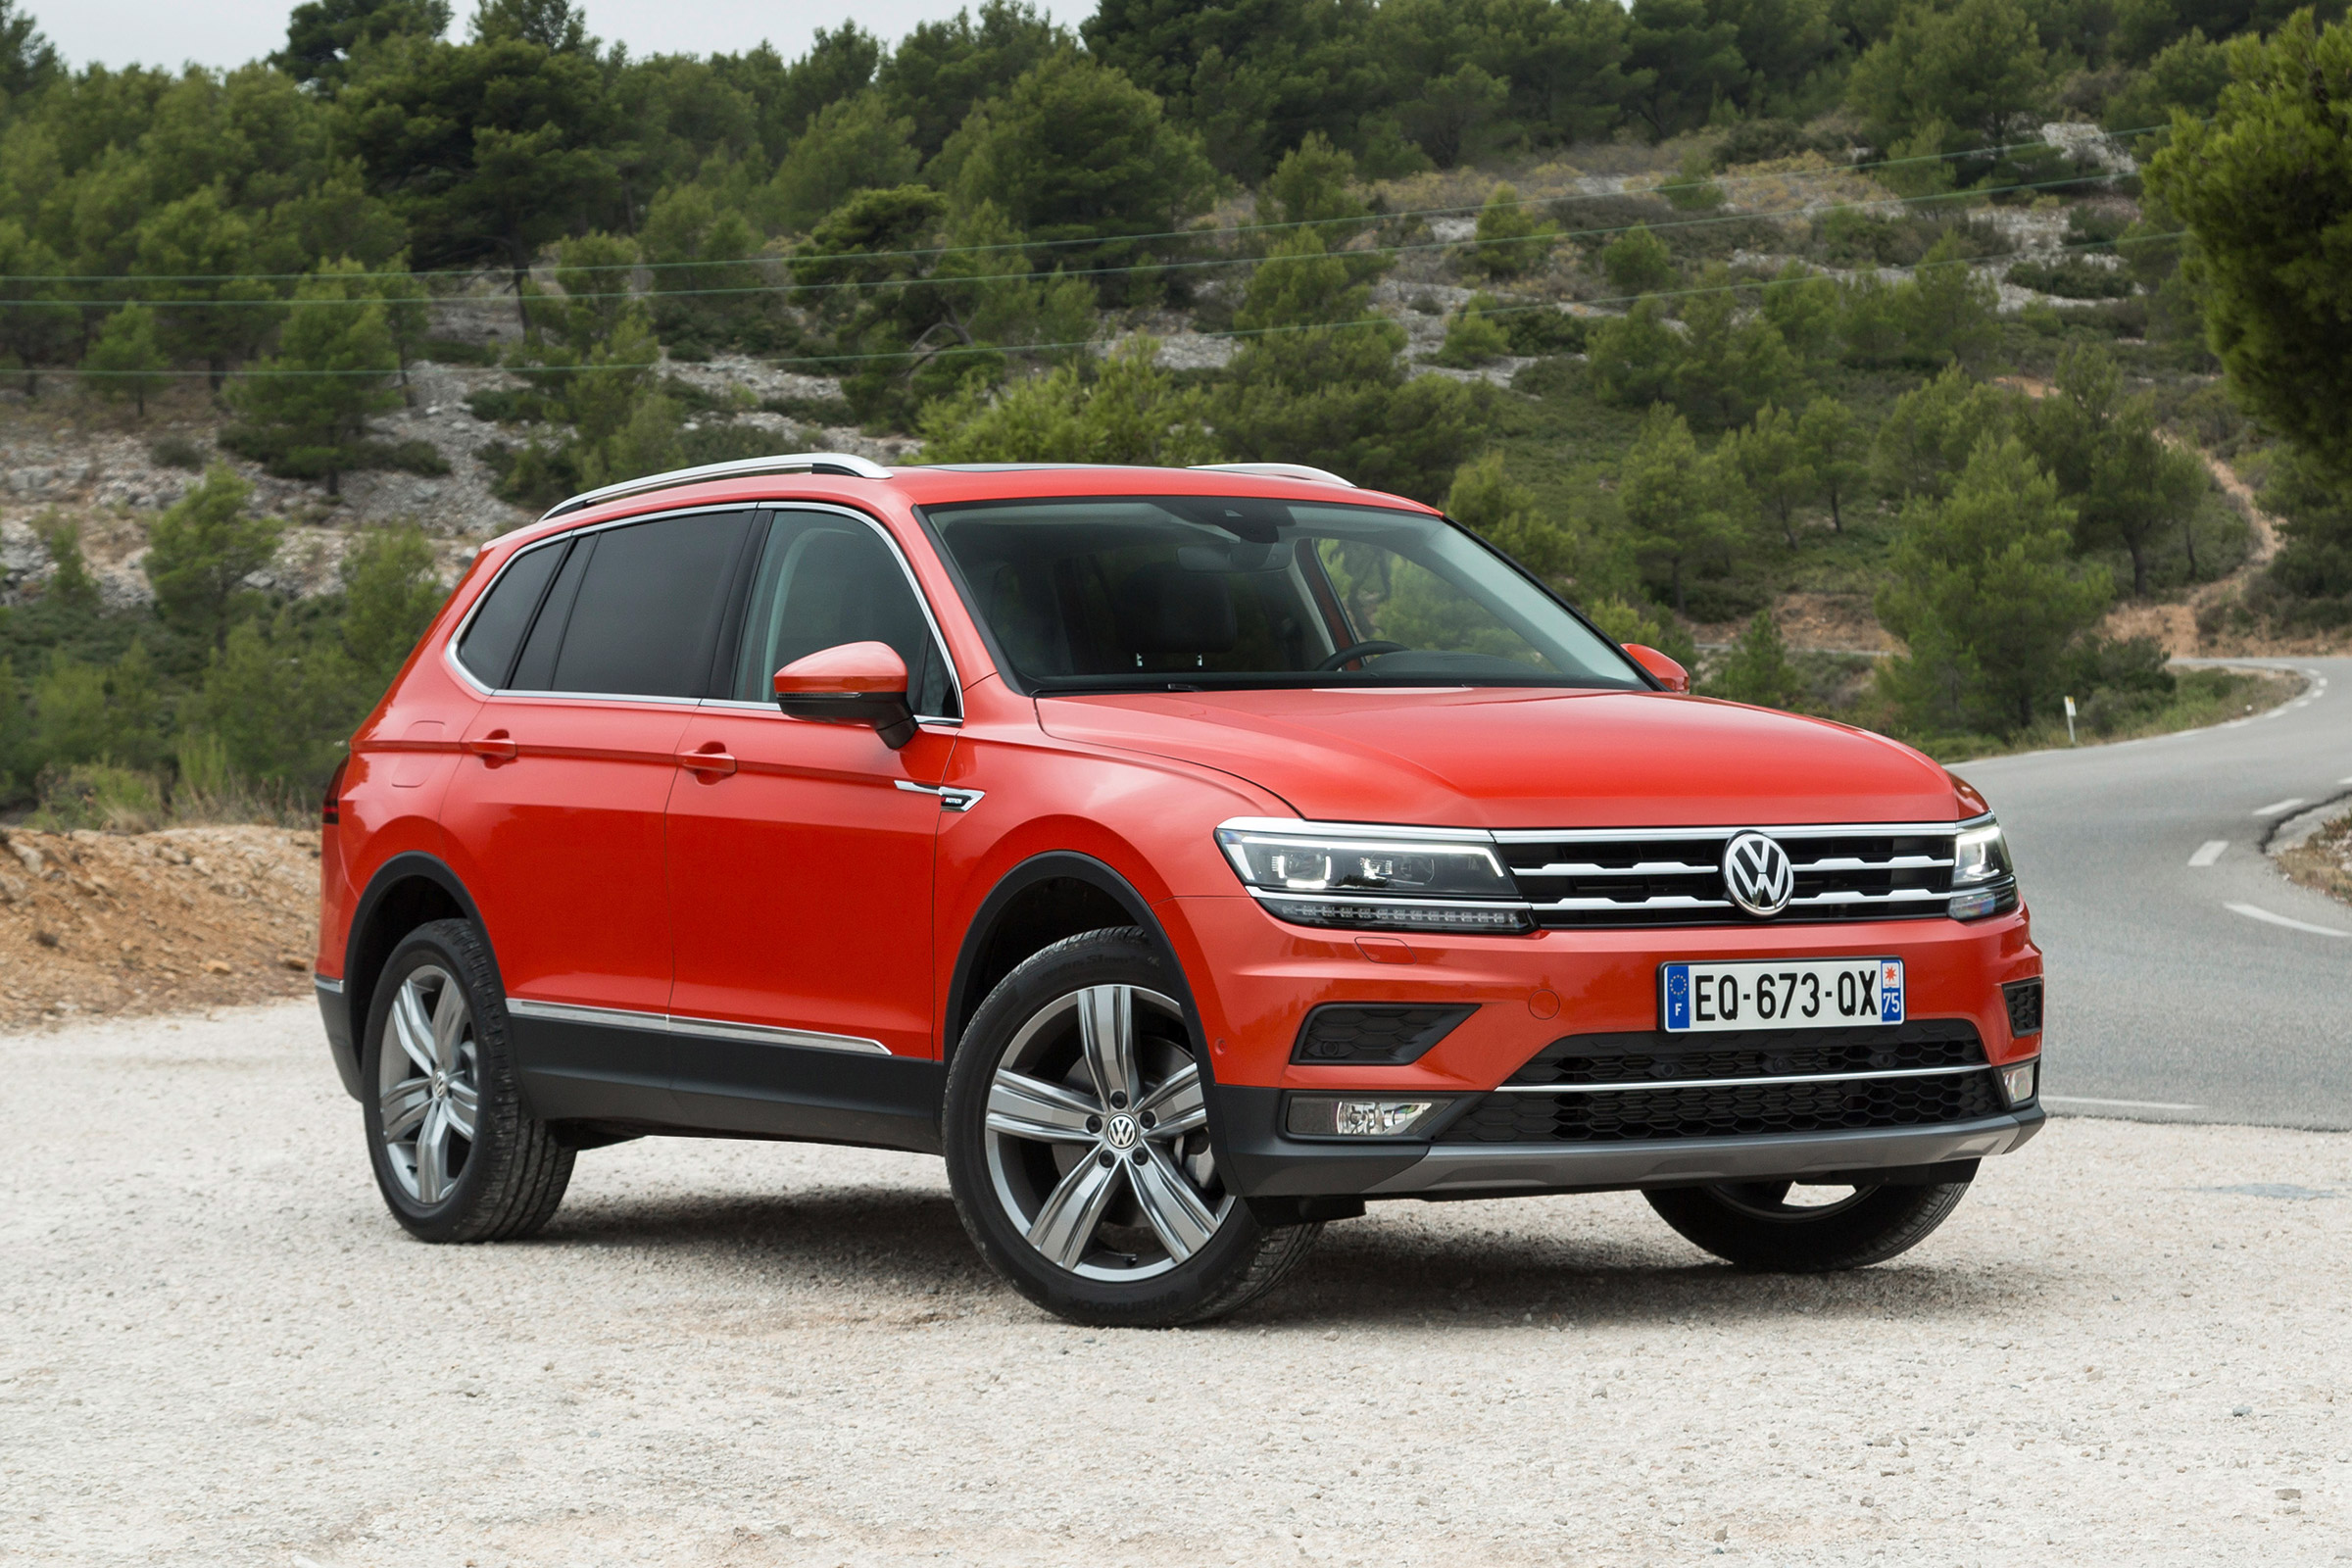 New Volkswagen Tiguan Allspace on sale now from £29,370 Auto Express